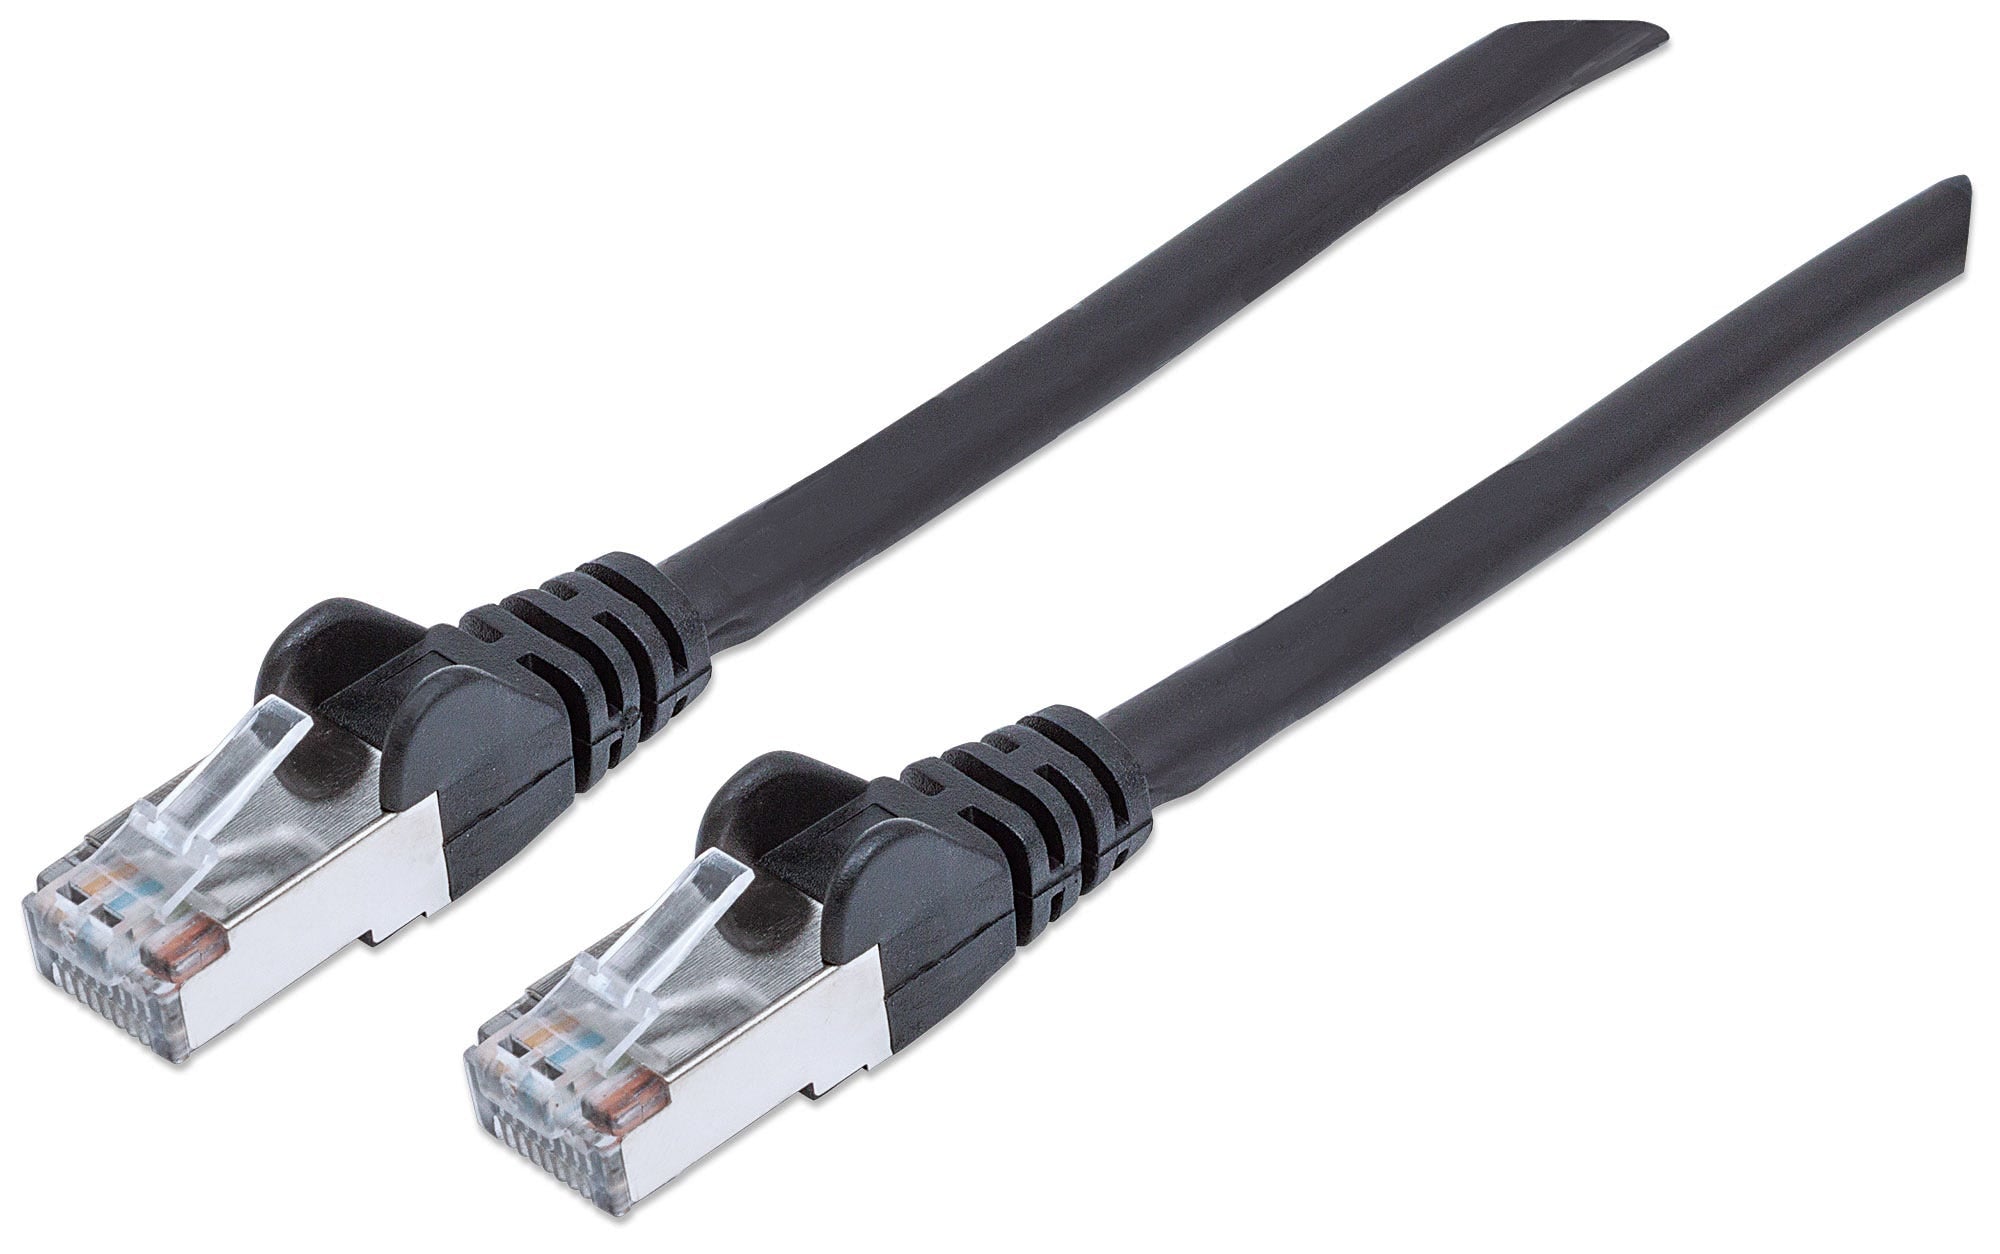 Intellinet Network Patch Cable, Cat6A, 30m, Black, Copper, S/FTP, LSOH / LSZH, PVC, RJ45, Gold Plated Contacts, Snagless, Booted, Lifetime Warranty, Polybag